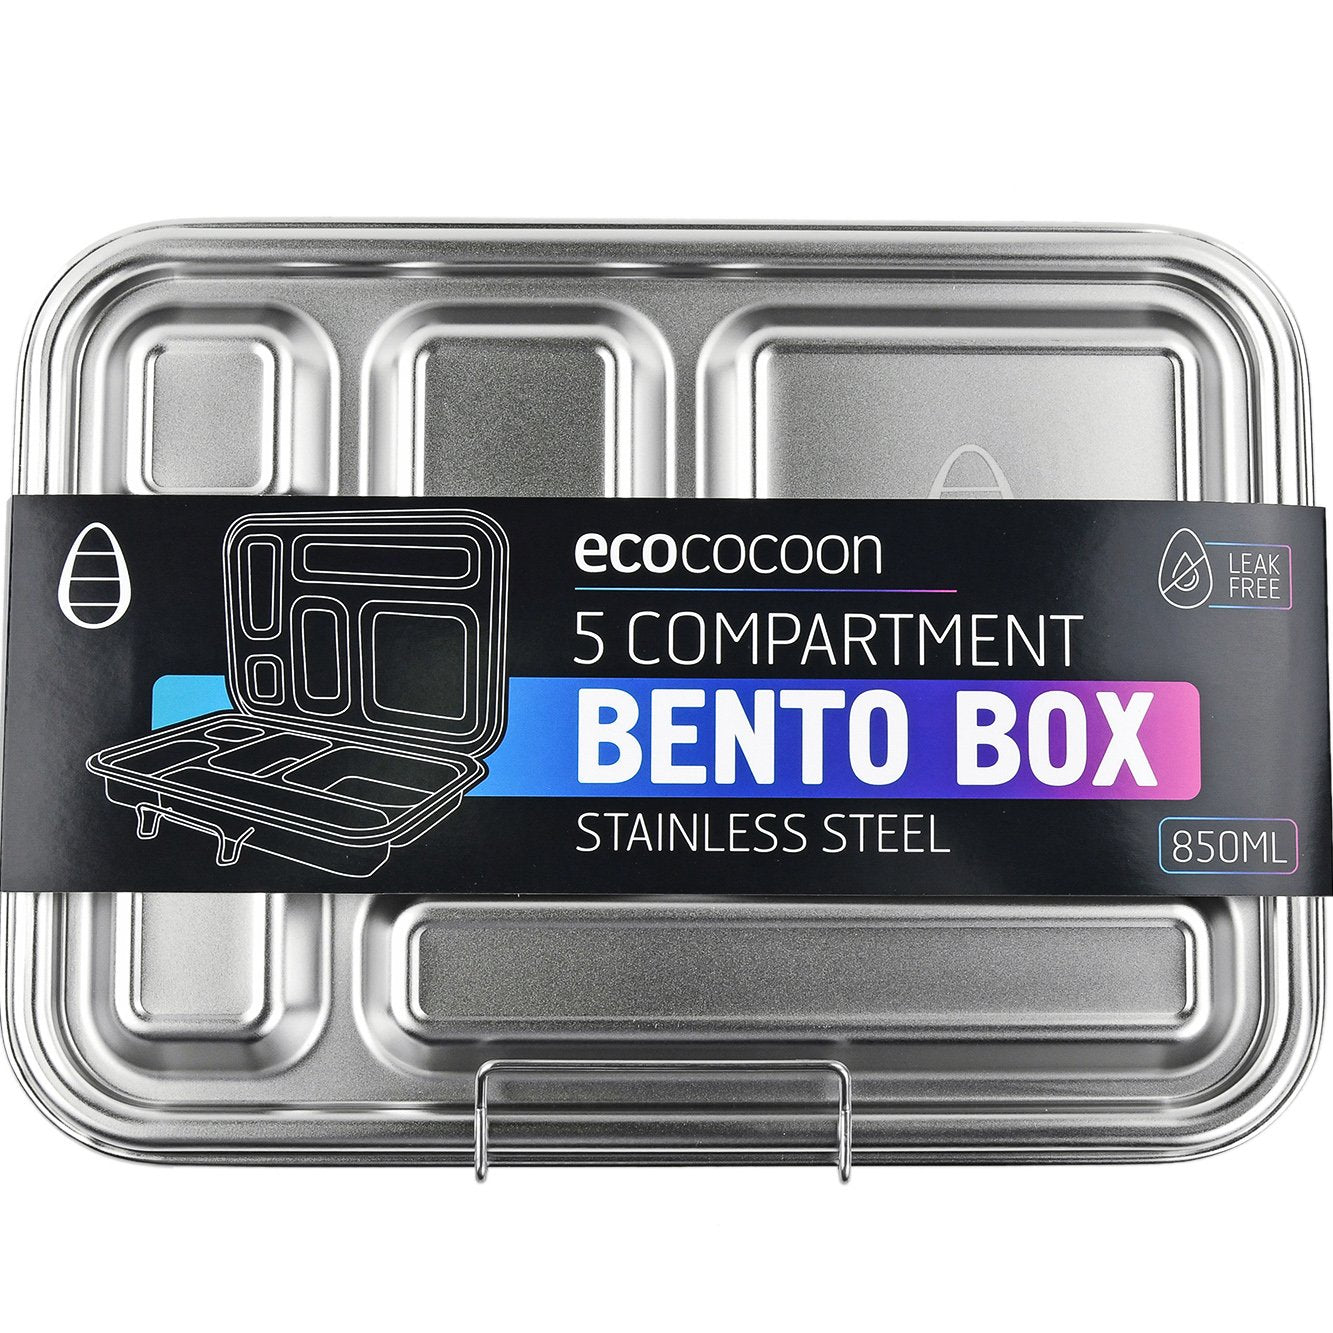 Ecococoon Stainless Steel Leakproof Bento Box - 5 compartment